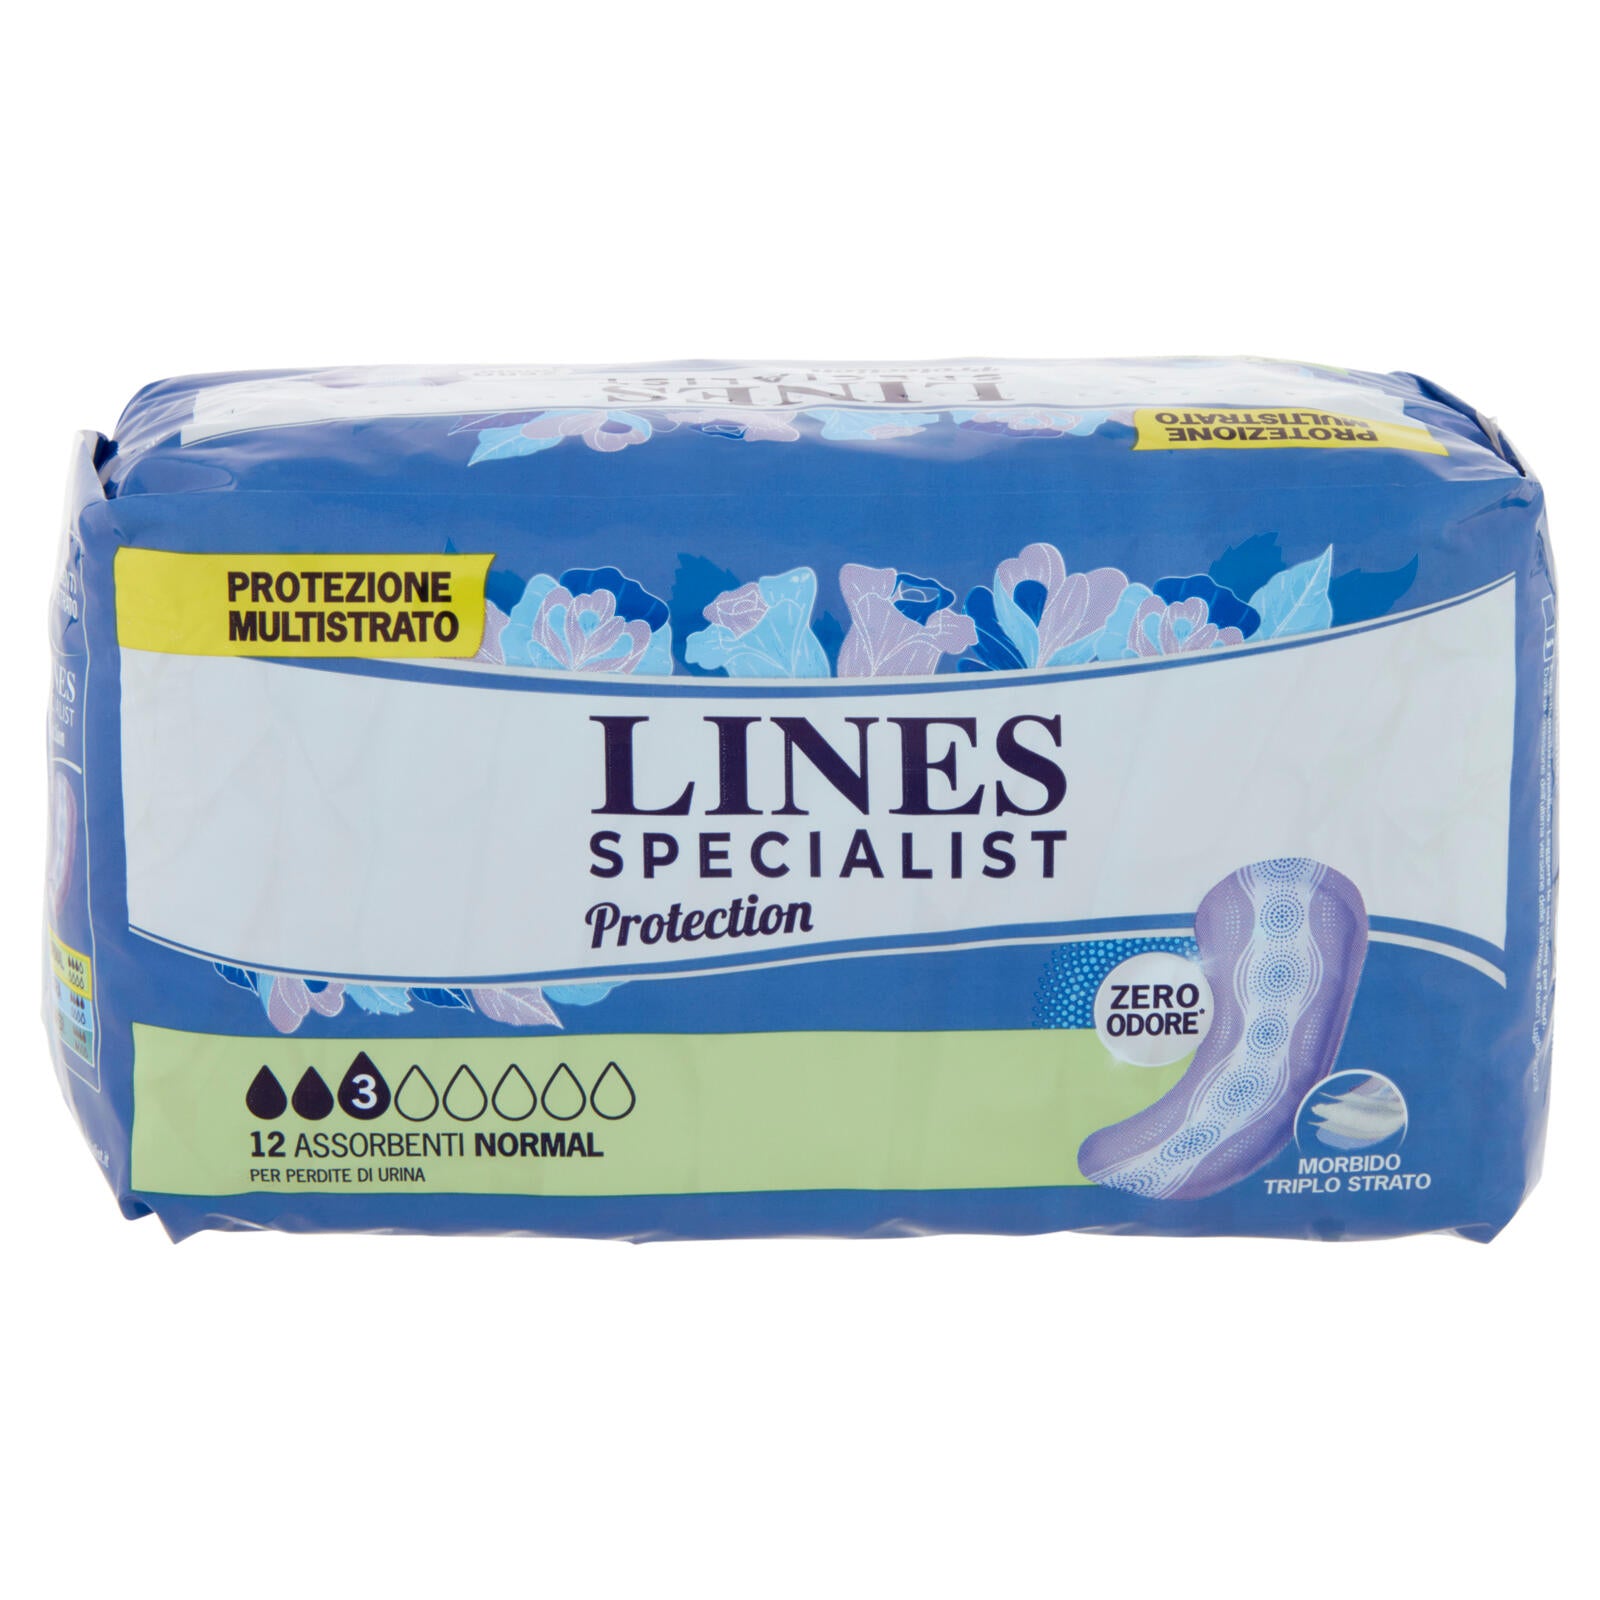 Lines Specialist Protection Normal 12 pz